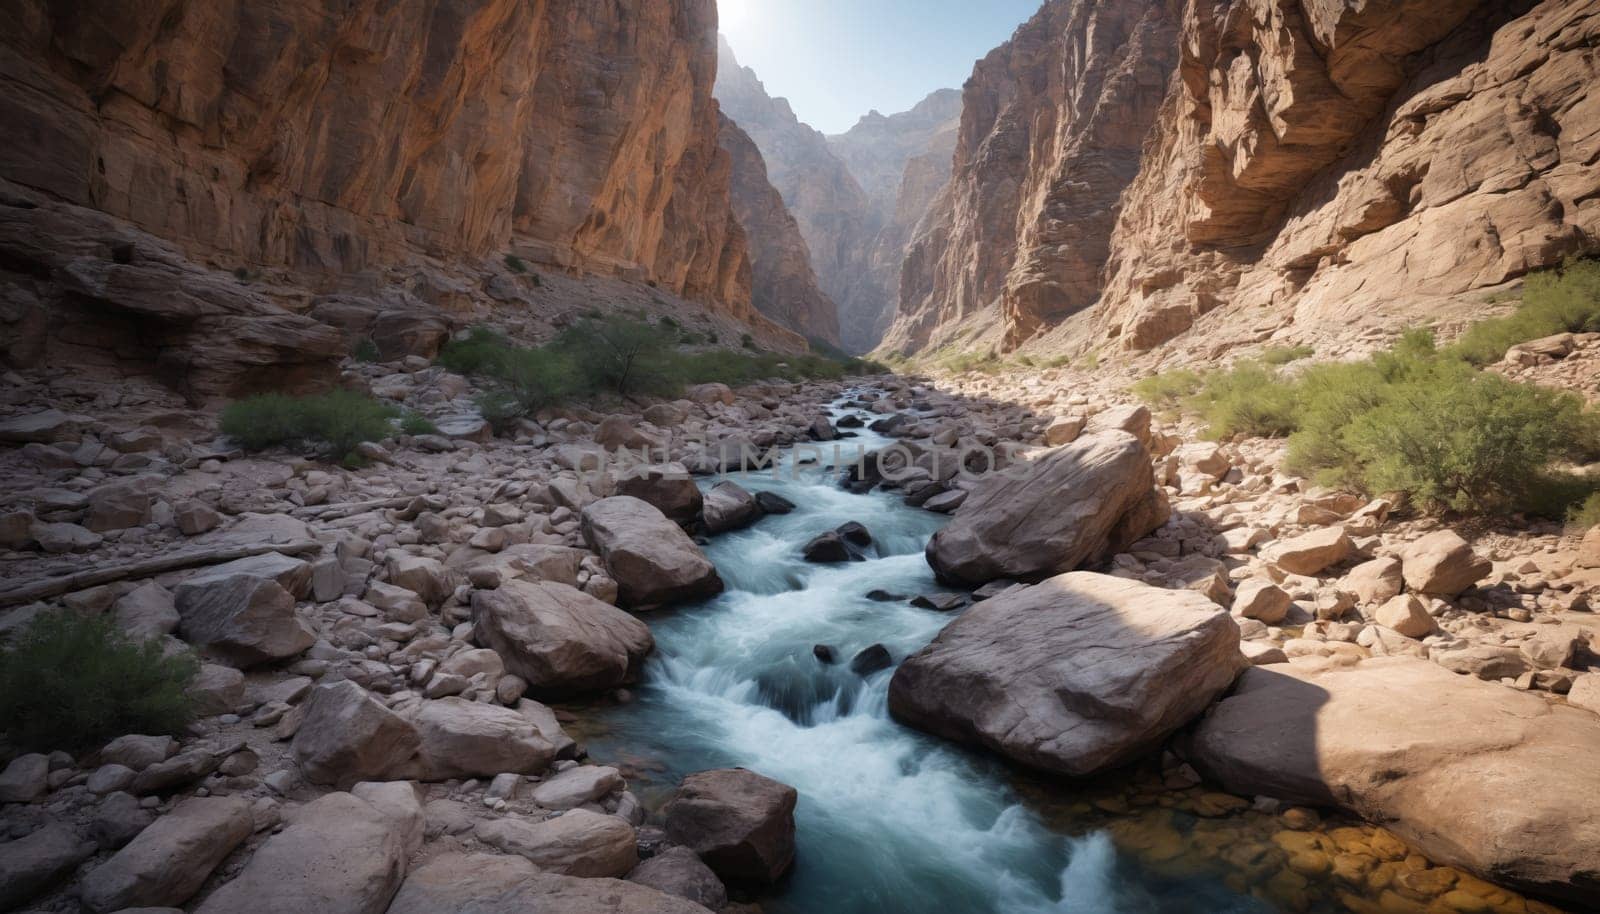 A rushing river flows through a canyon, with steep rocky walls rising on either side. The water is turquoise blue and white, and the rocks are a warm brown. Sunlight shines brightly on the canyon walls and on the river, casting long shadows on the rocks below.